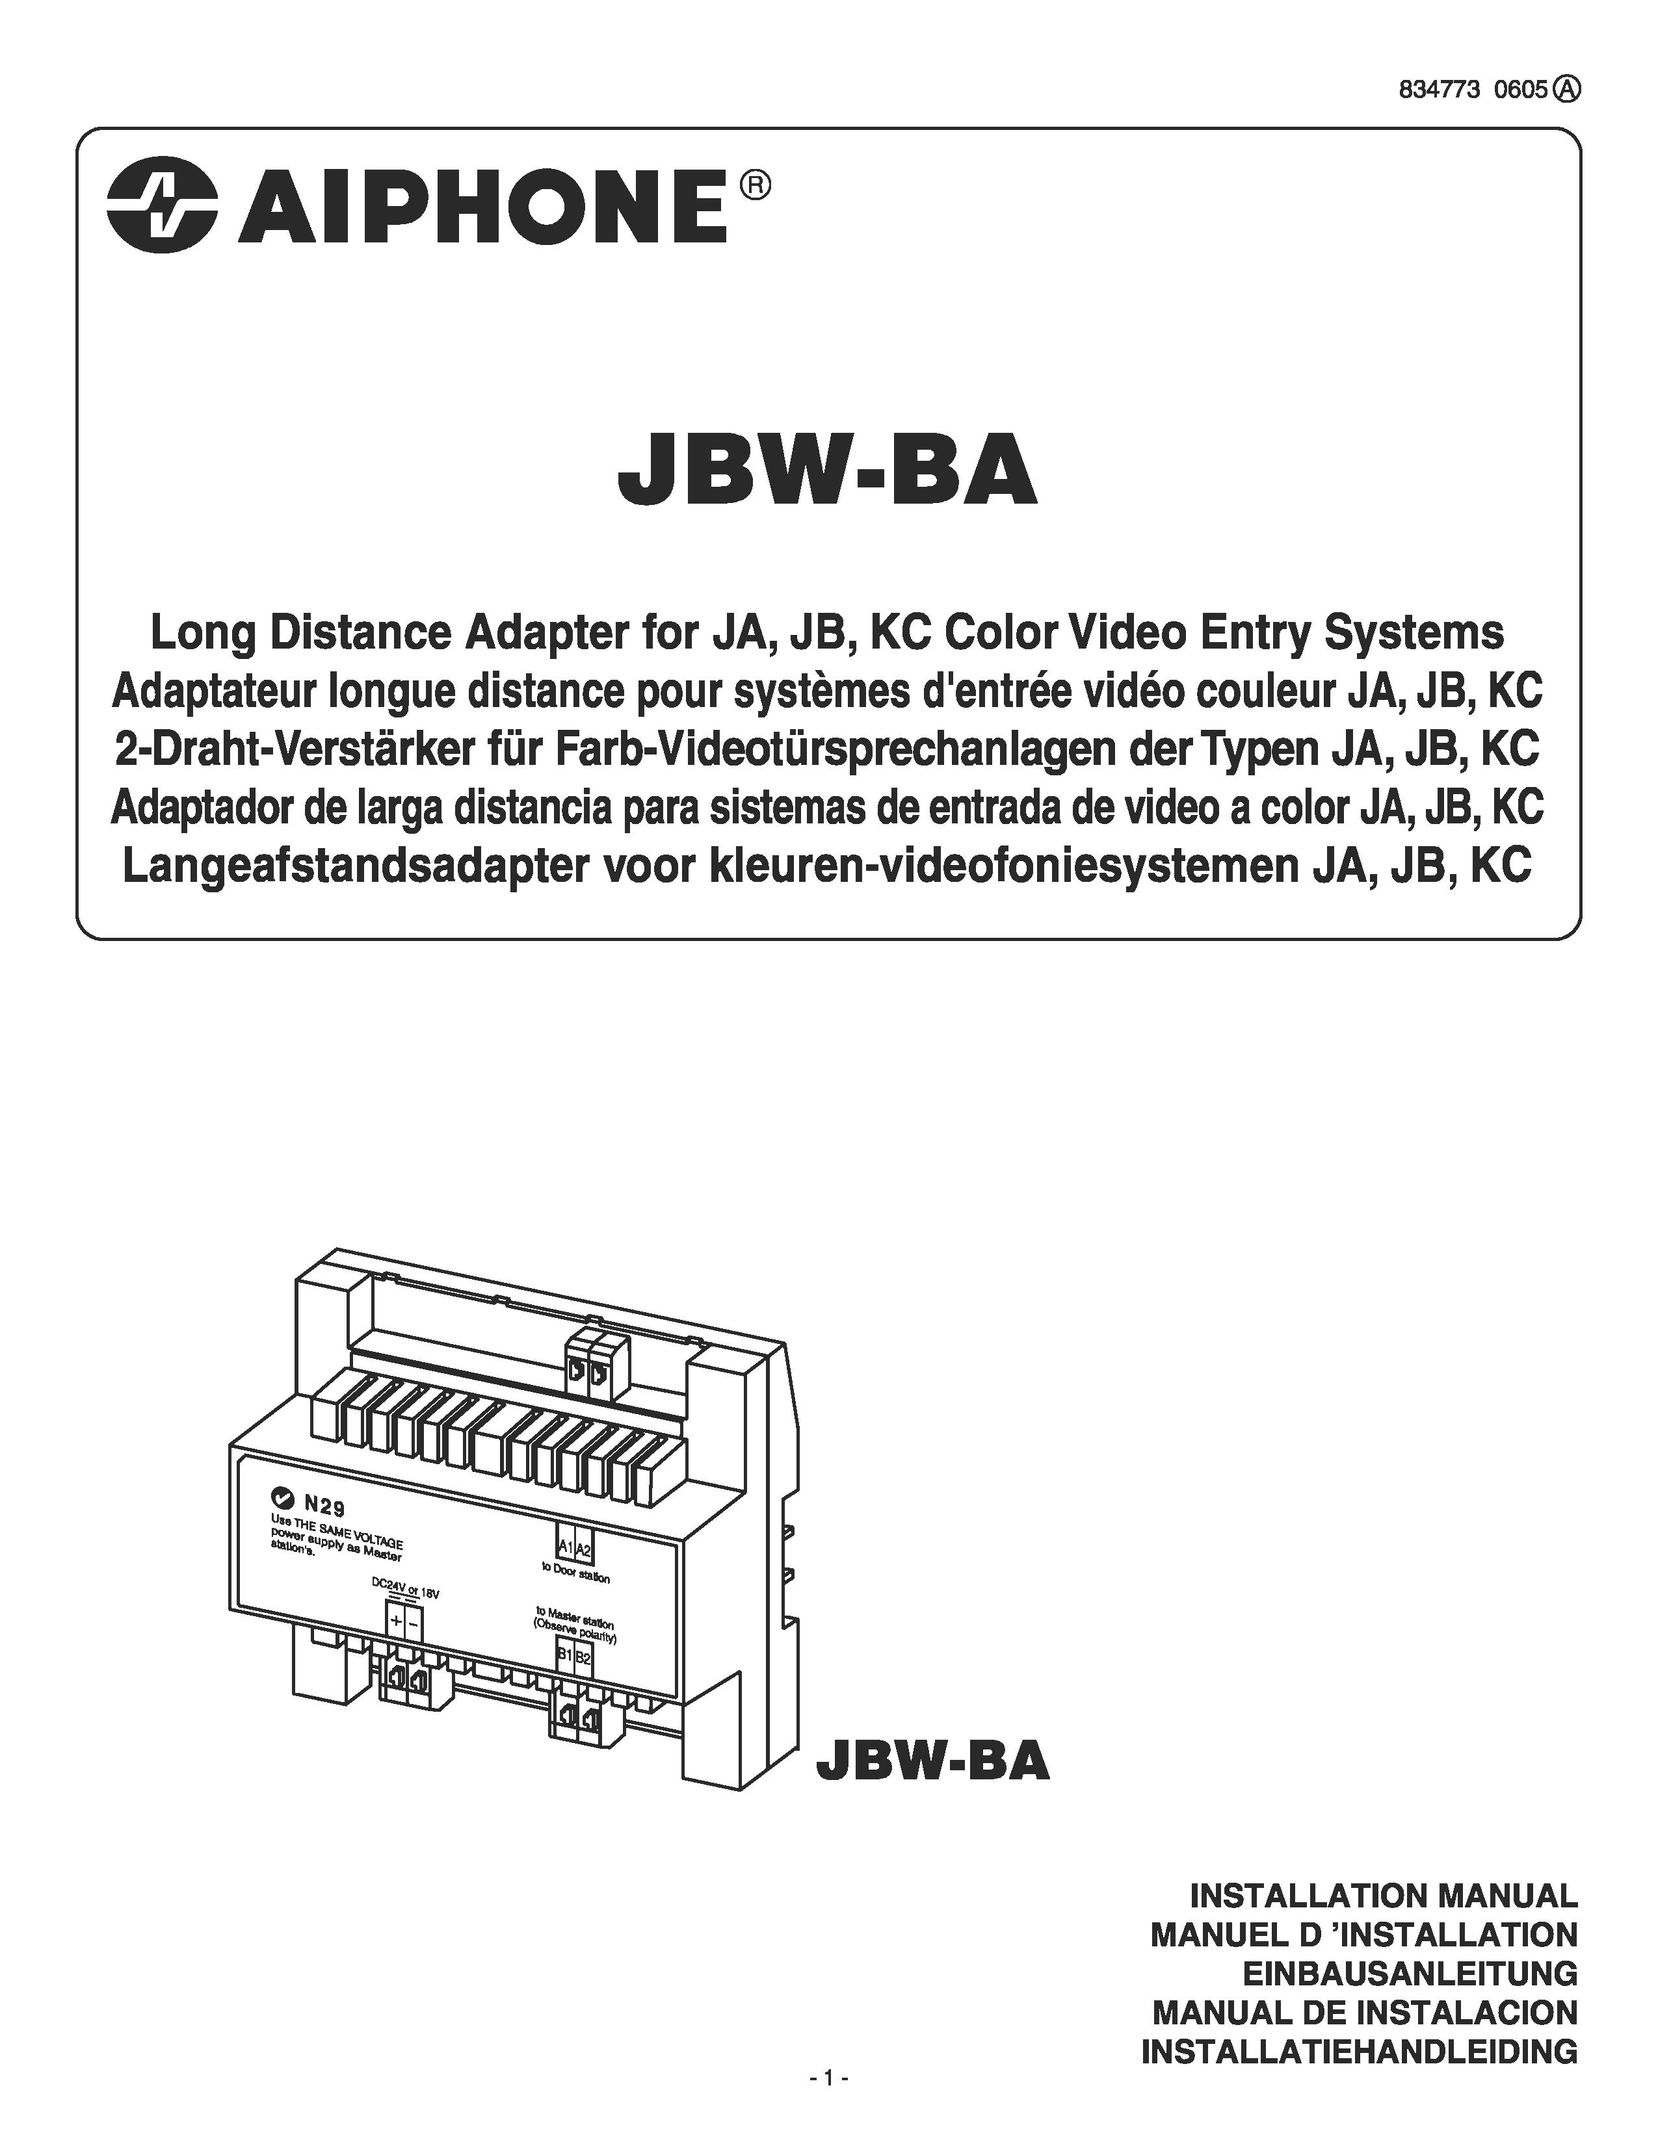 Aiphone JBW-BA Video Gaming Accessories User Manual (Page 1)